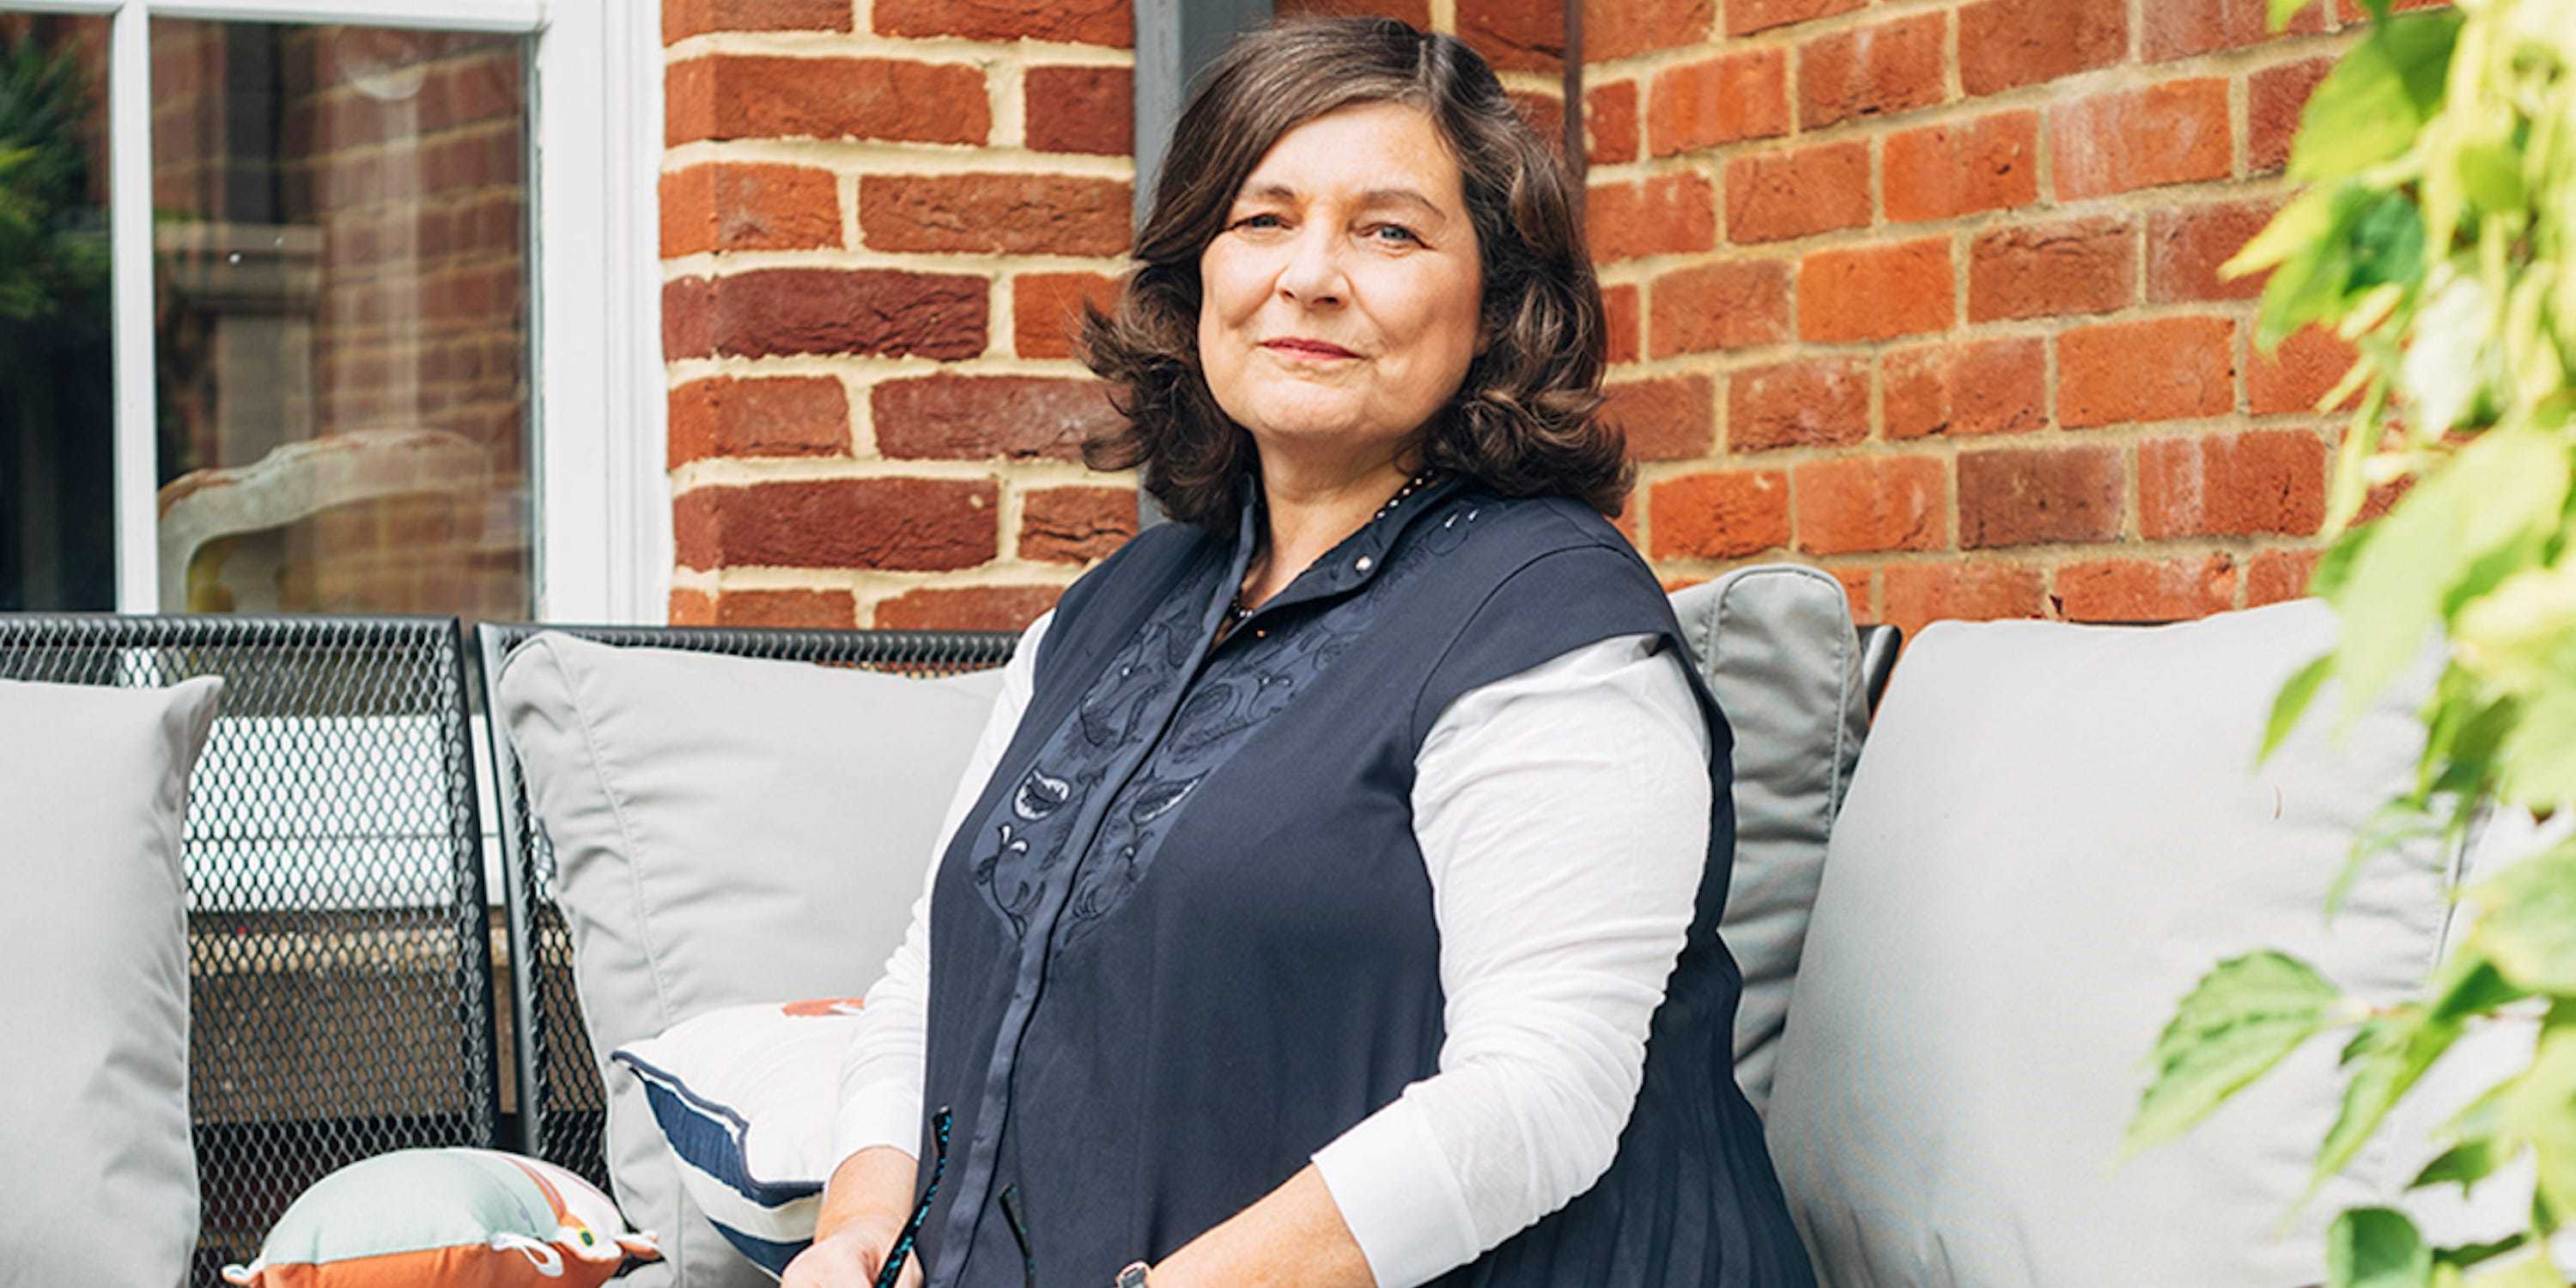 Anne Boden, founder & CEO Starling Bank